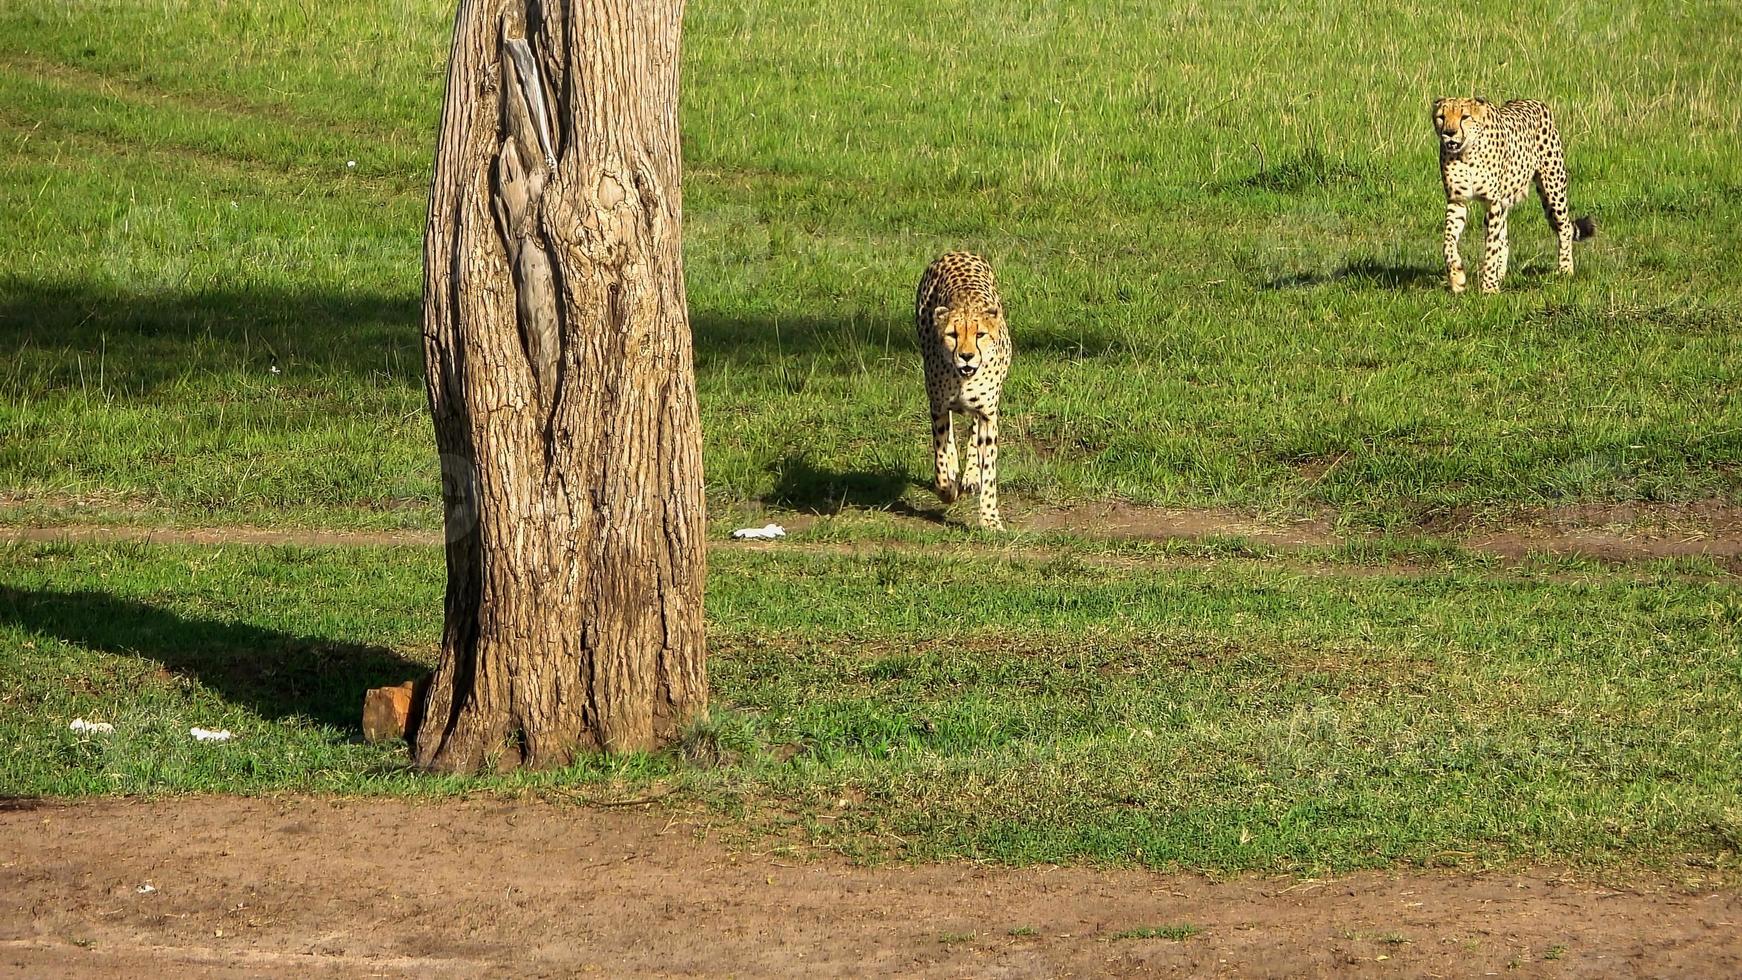 Cheetahs in the wild of Africa in search of prey. photo